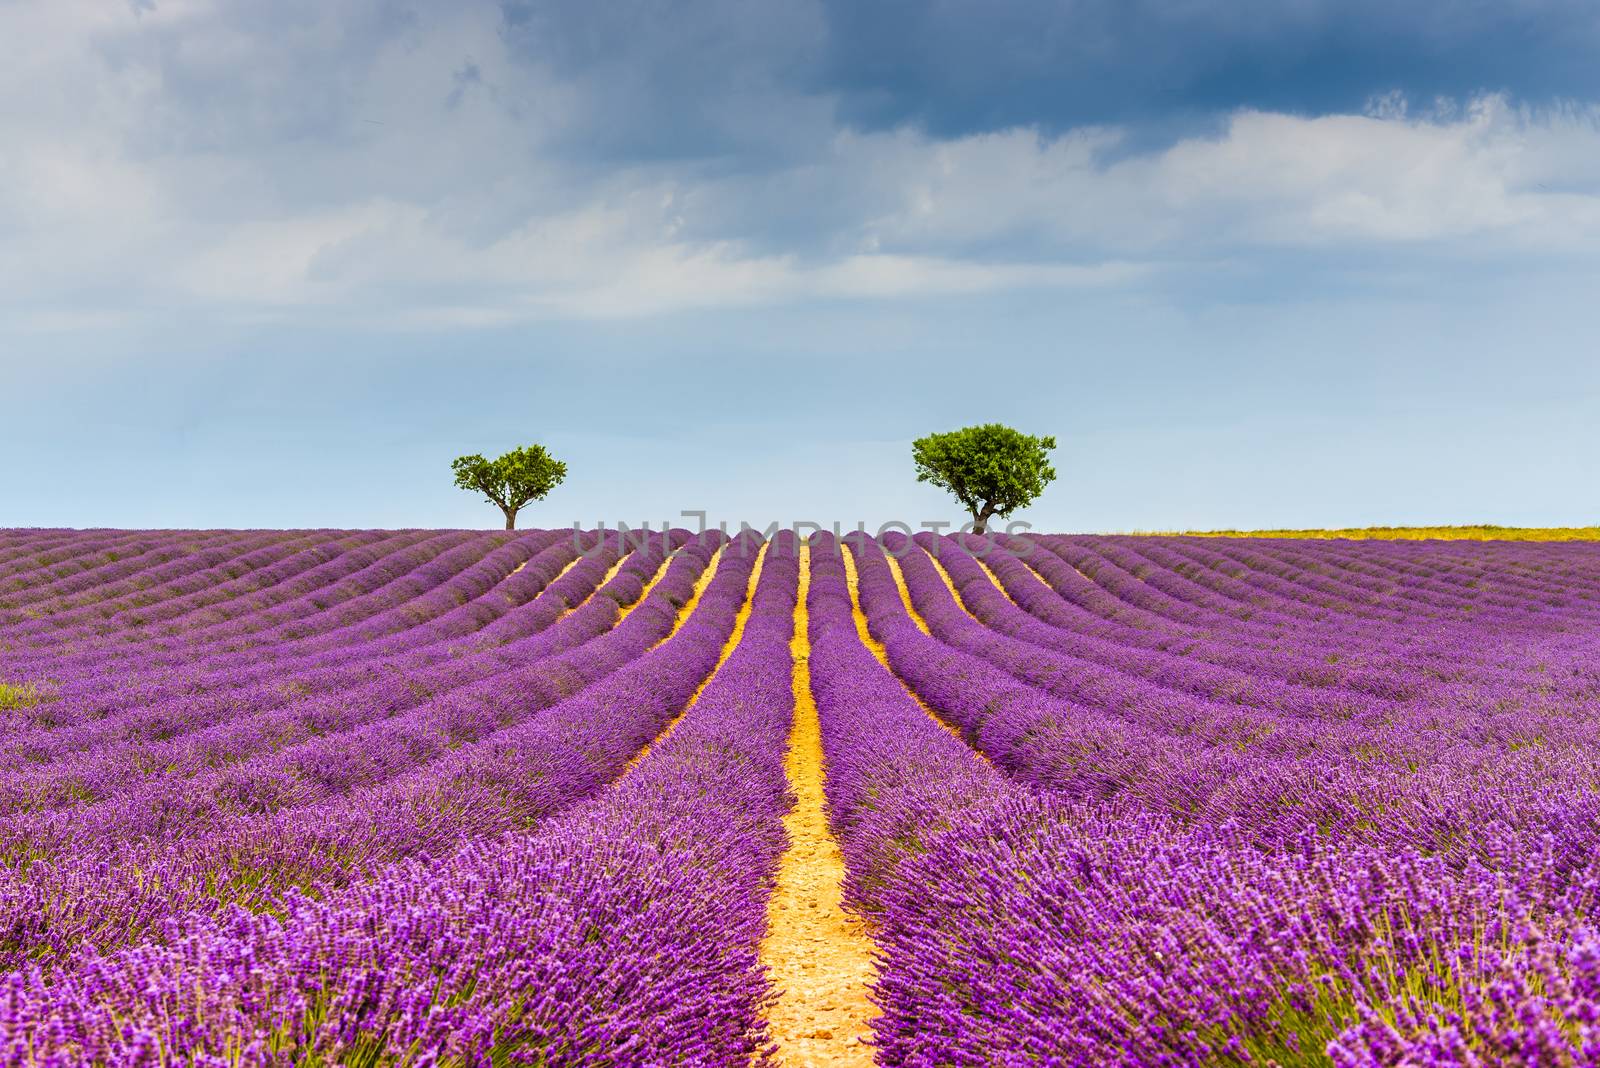 The Valensole plateau is one of the main places where lavender is grown in France, located in the Alpes de Haute Provence in the south-east of France.